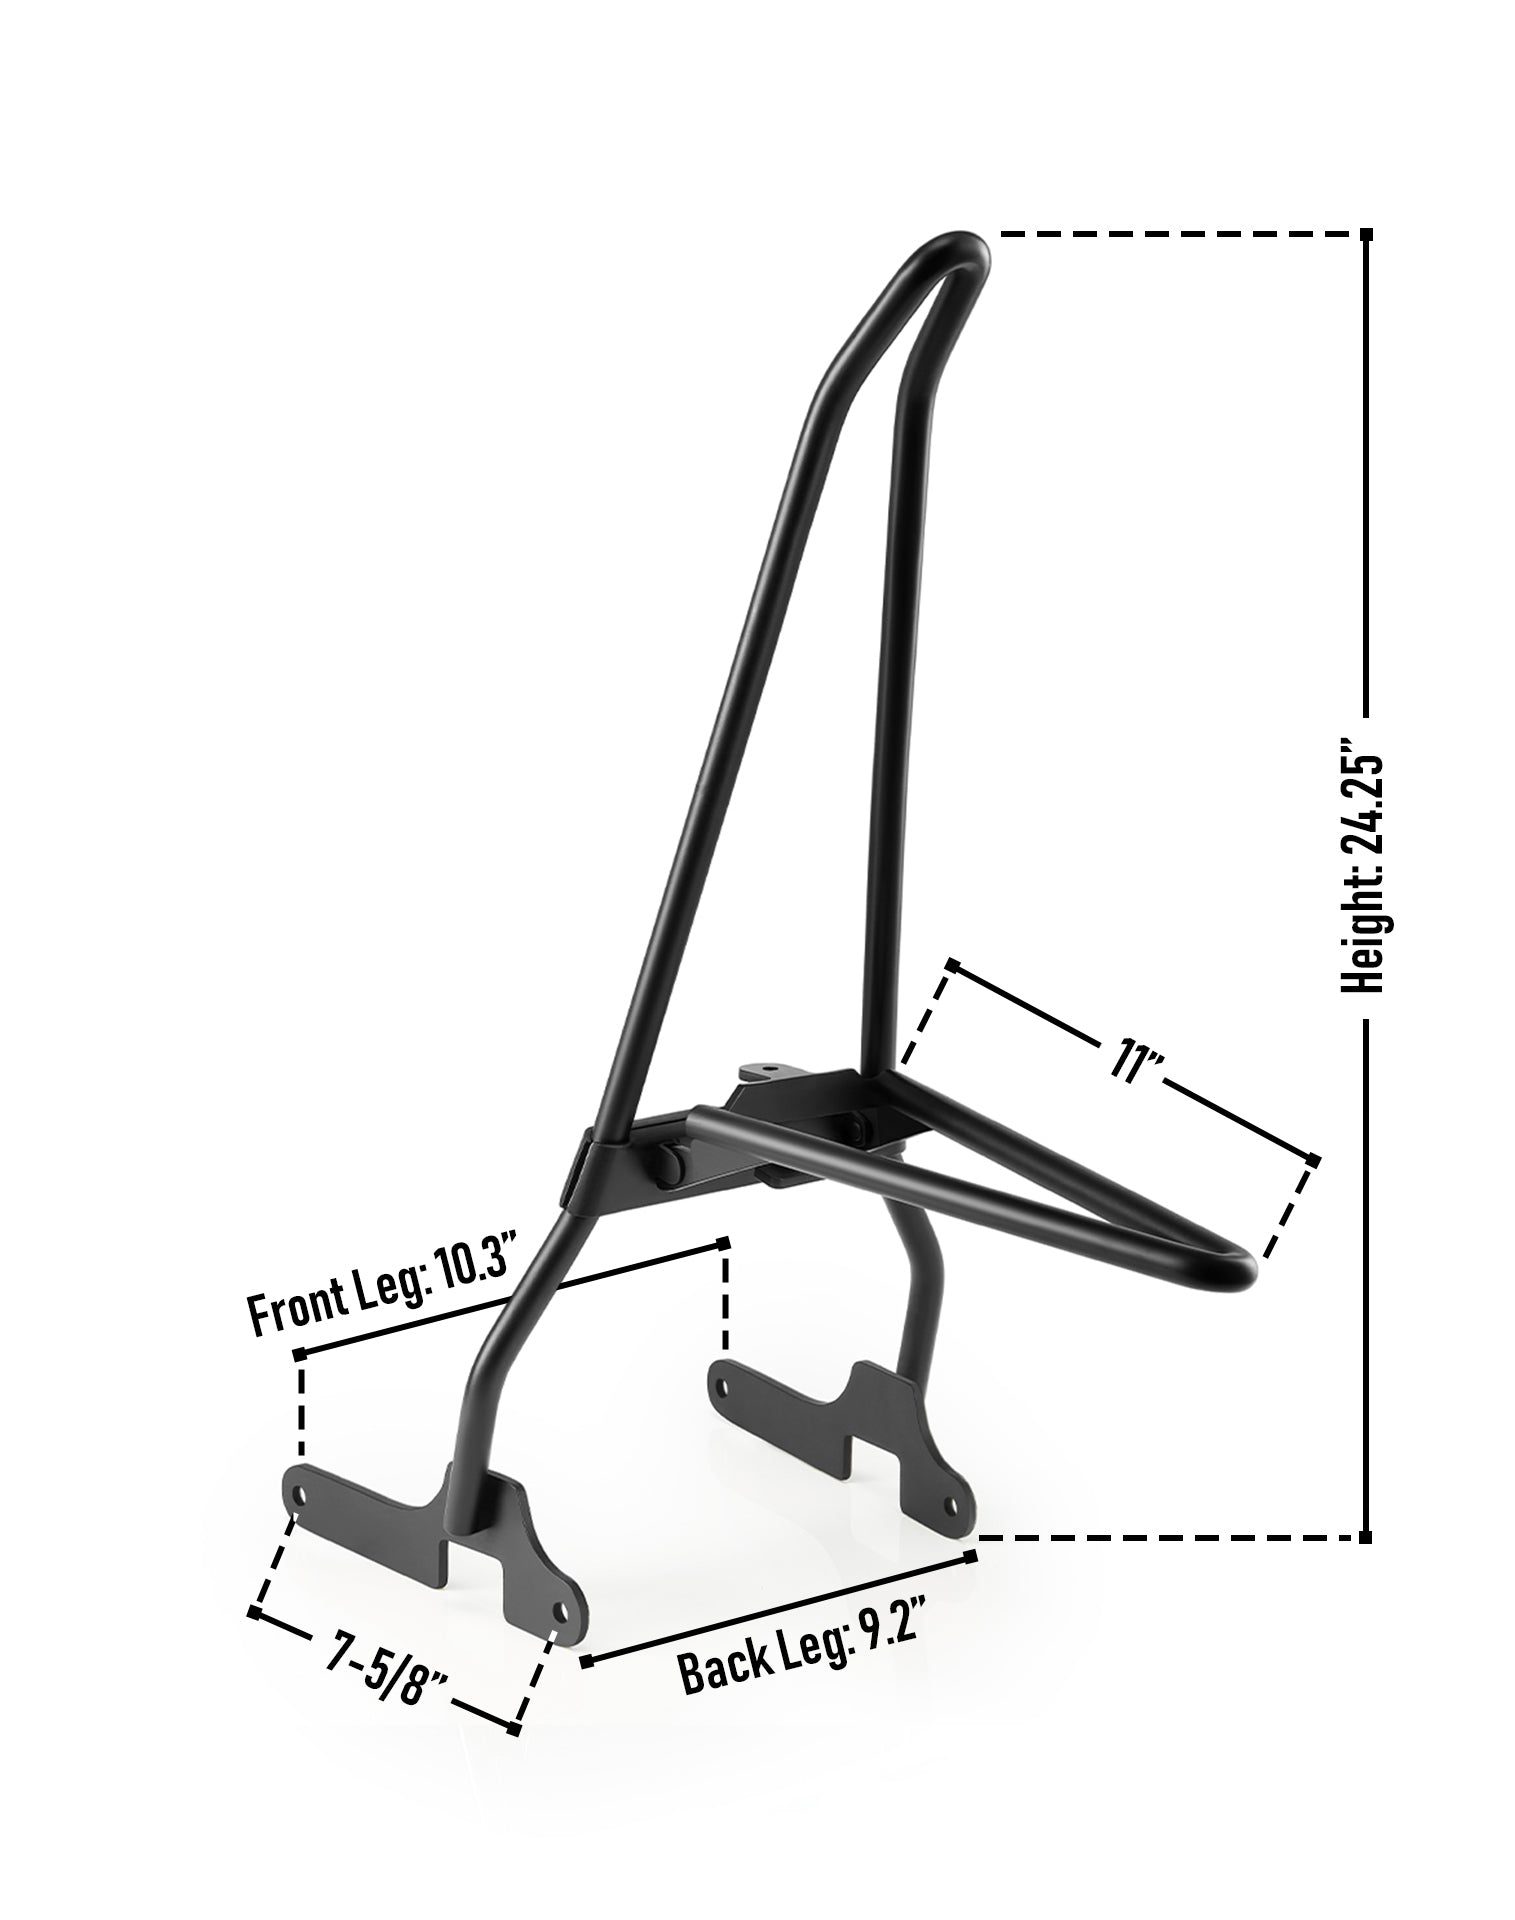 Iron Born Sissy Bar with Foldable Luggage Rack for Harley Sportster 883 Iron XL883N Matte Black Dimension